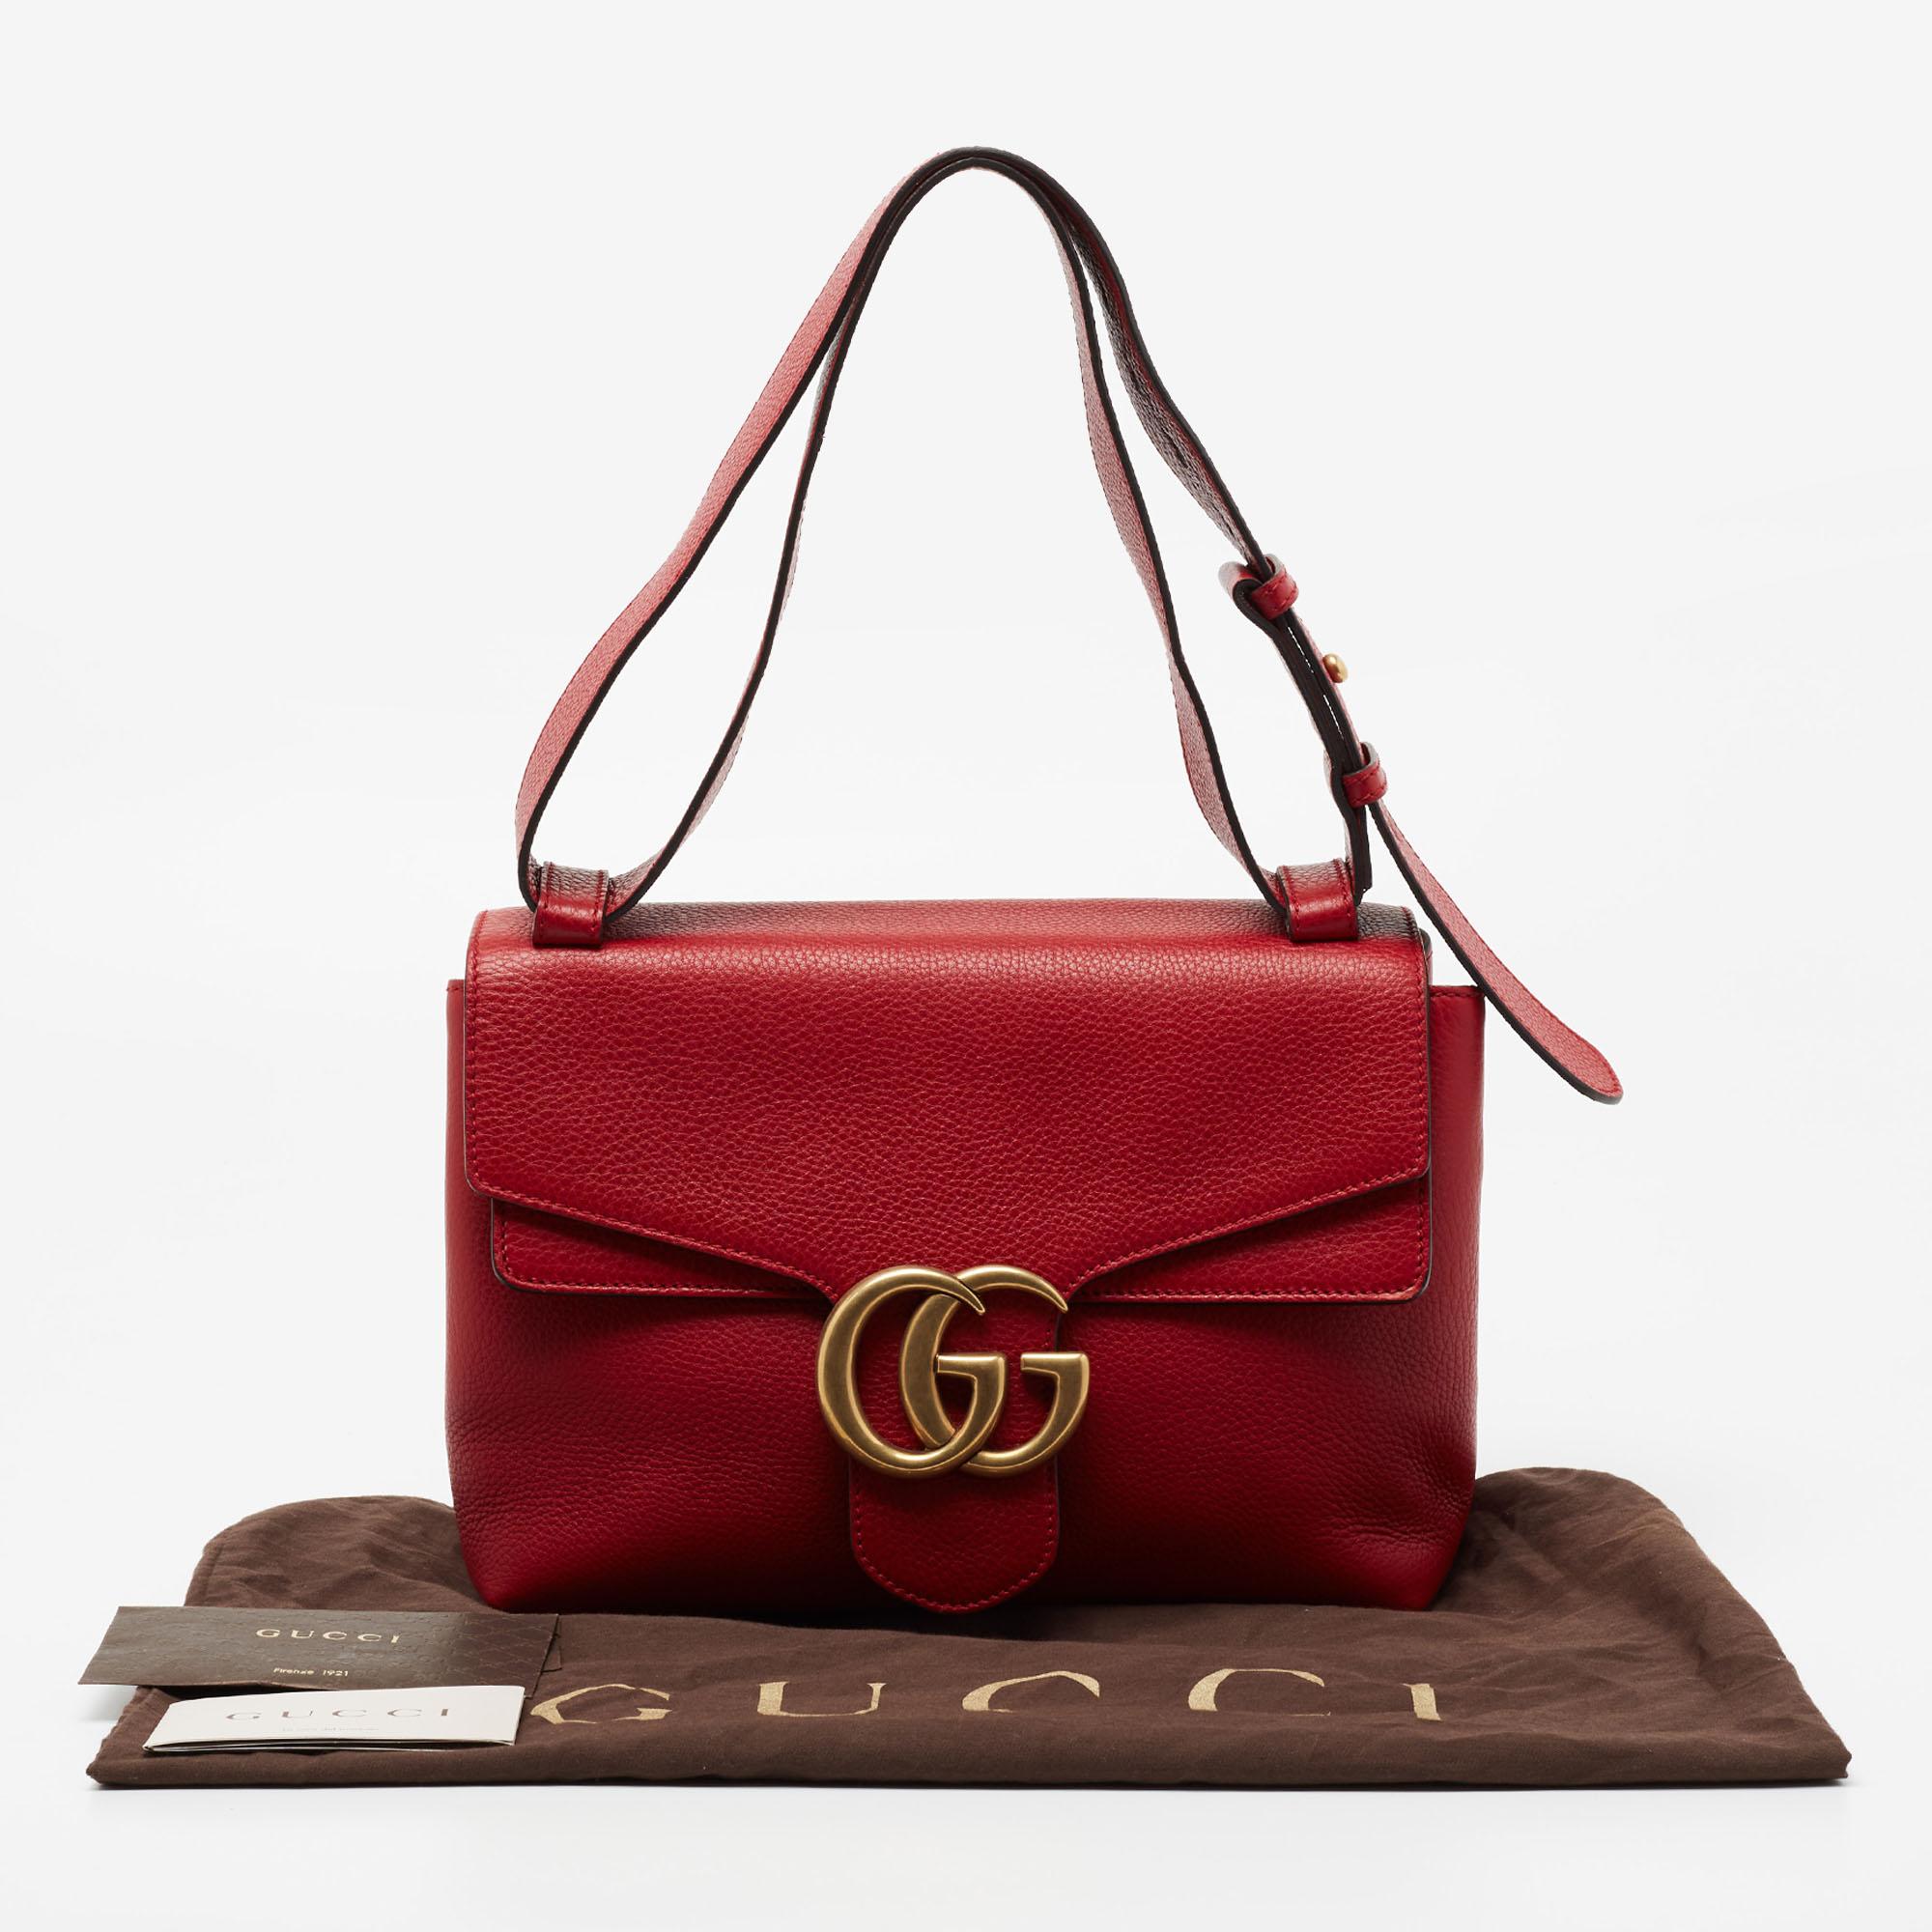 Gucci Red Leather GG Marmont Shoulder Bag 9